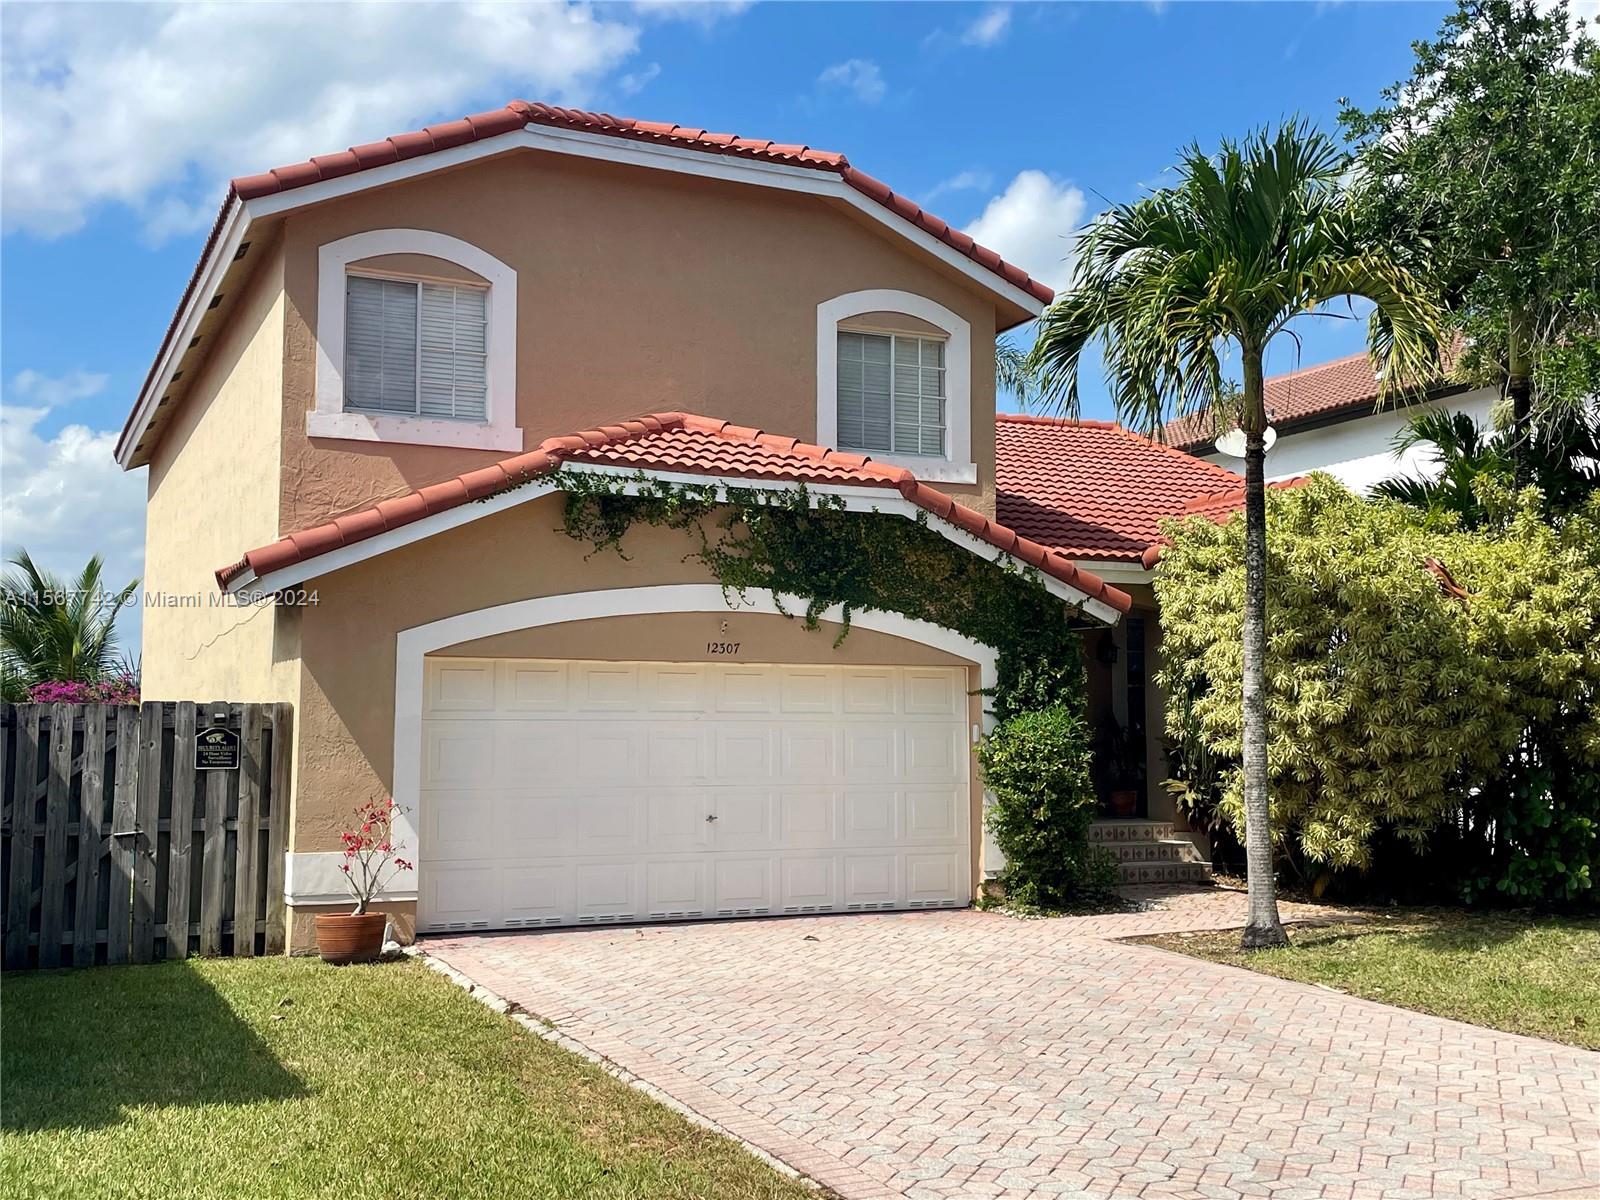 12307 SW 143rd Ln, Miami, Florida 33186, 3 Bedrooms Bedrooms, ,2 BathroomsBathrooms,Residential,For Sale,12307 SW 143rd Ln,A11567742